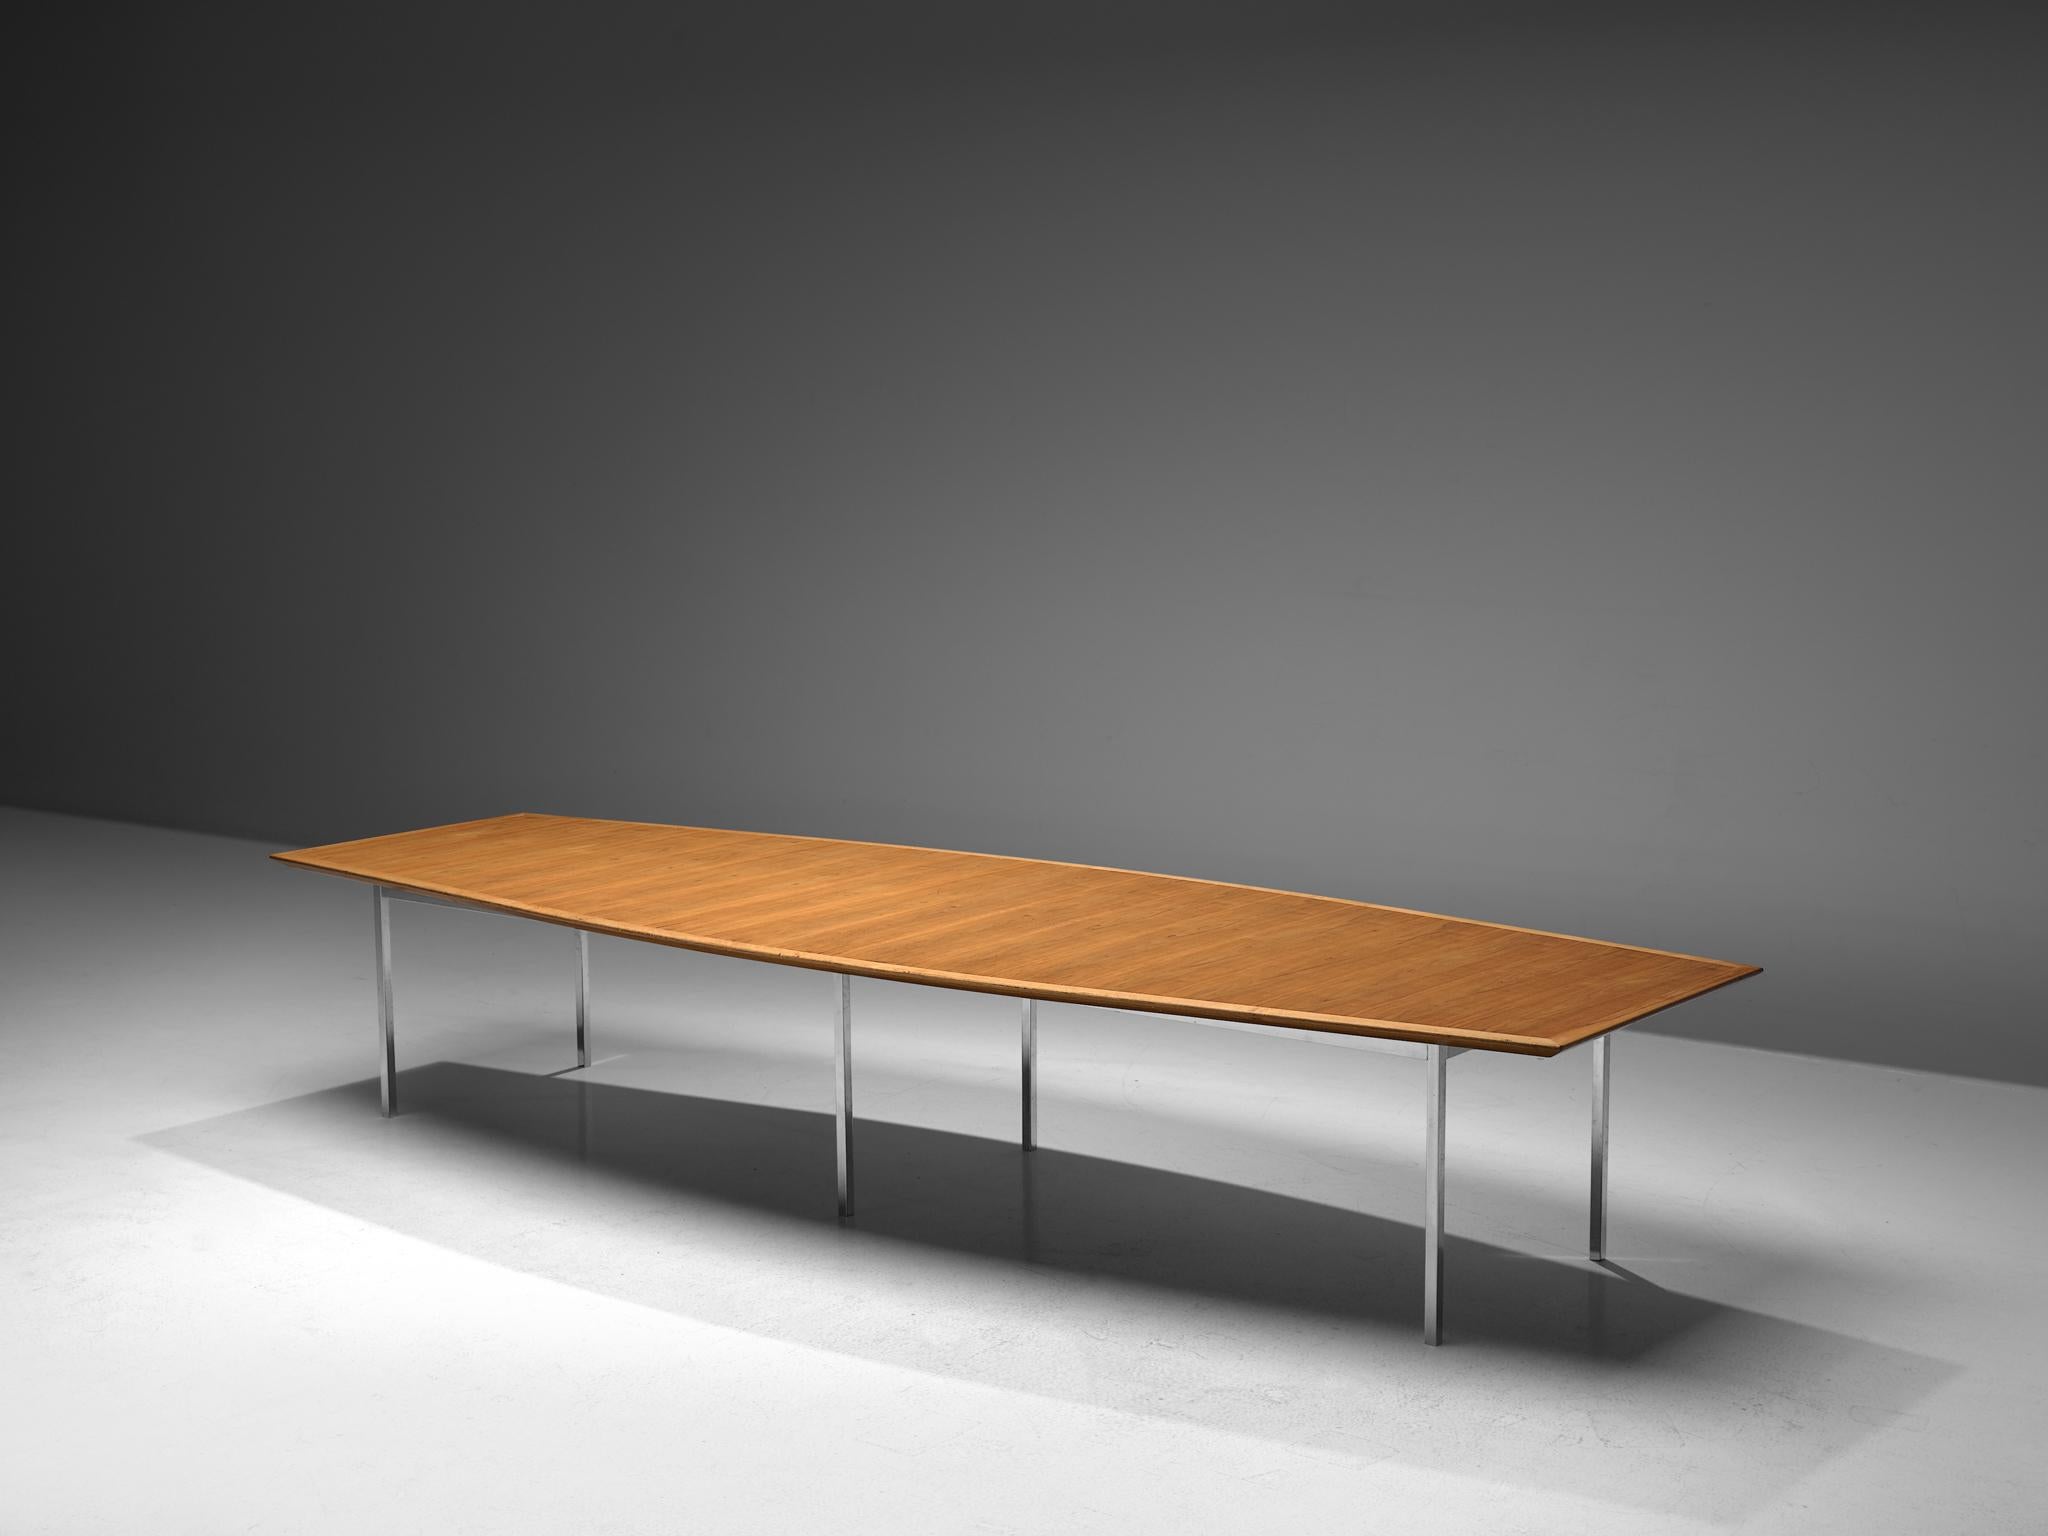 Florence Knoll for Knoll International, table model 580, walnut and chromed metal, United States, circa 1960, 4mtr/13ft long.

Large dining table with boat shaped top in teak. Twelve people can be easily seat around this grand conference table. The